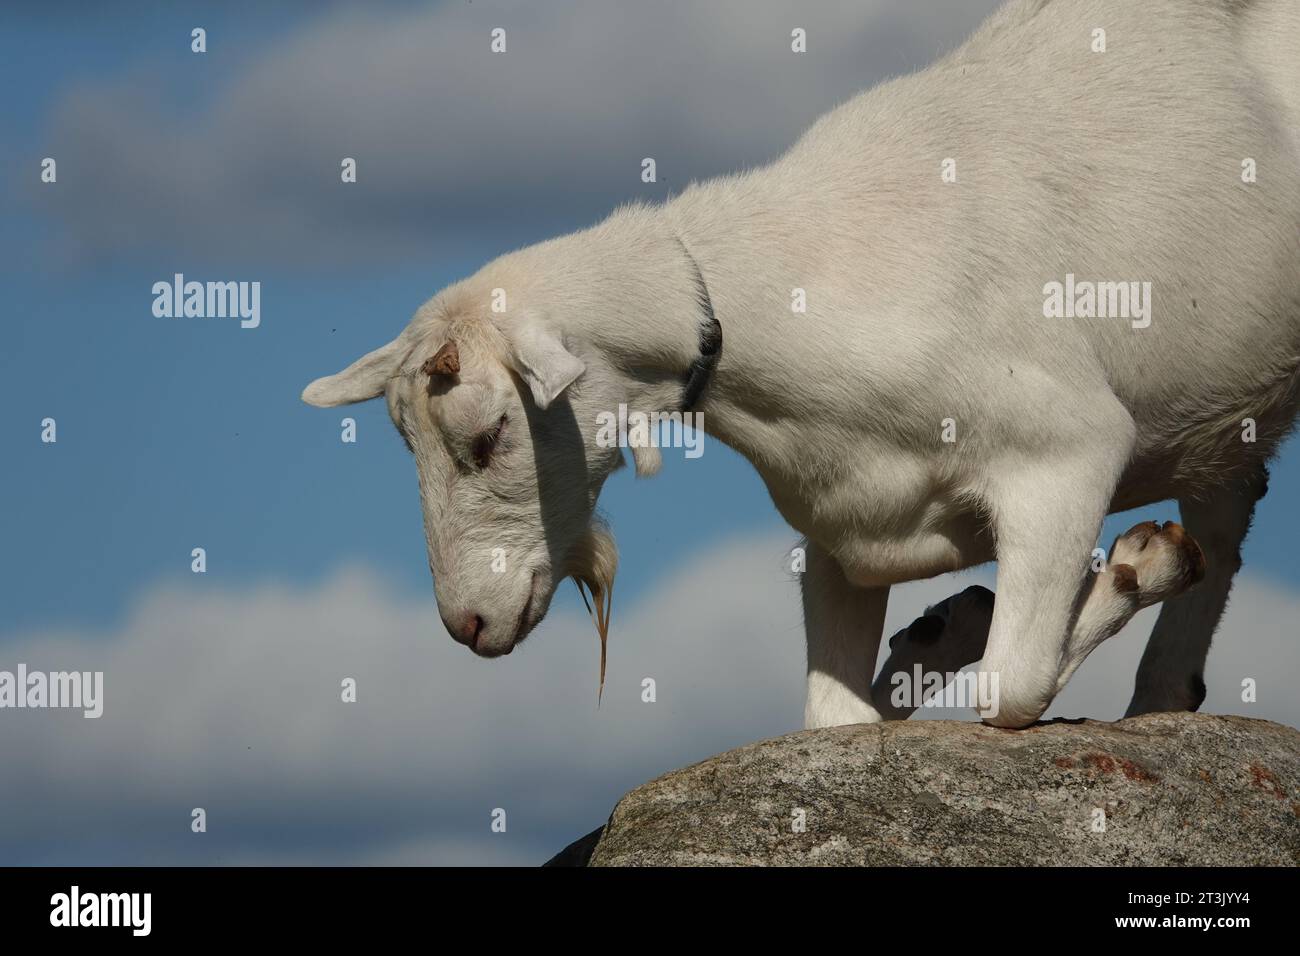 white goat kneeling on a rock against a blue sky with puffy white clouds Stock Photo